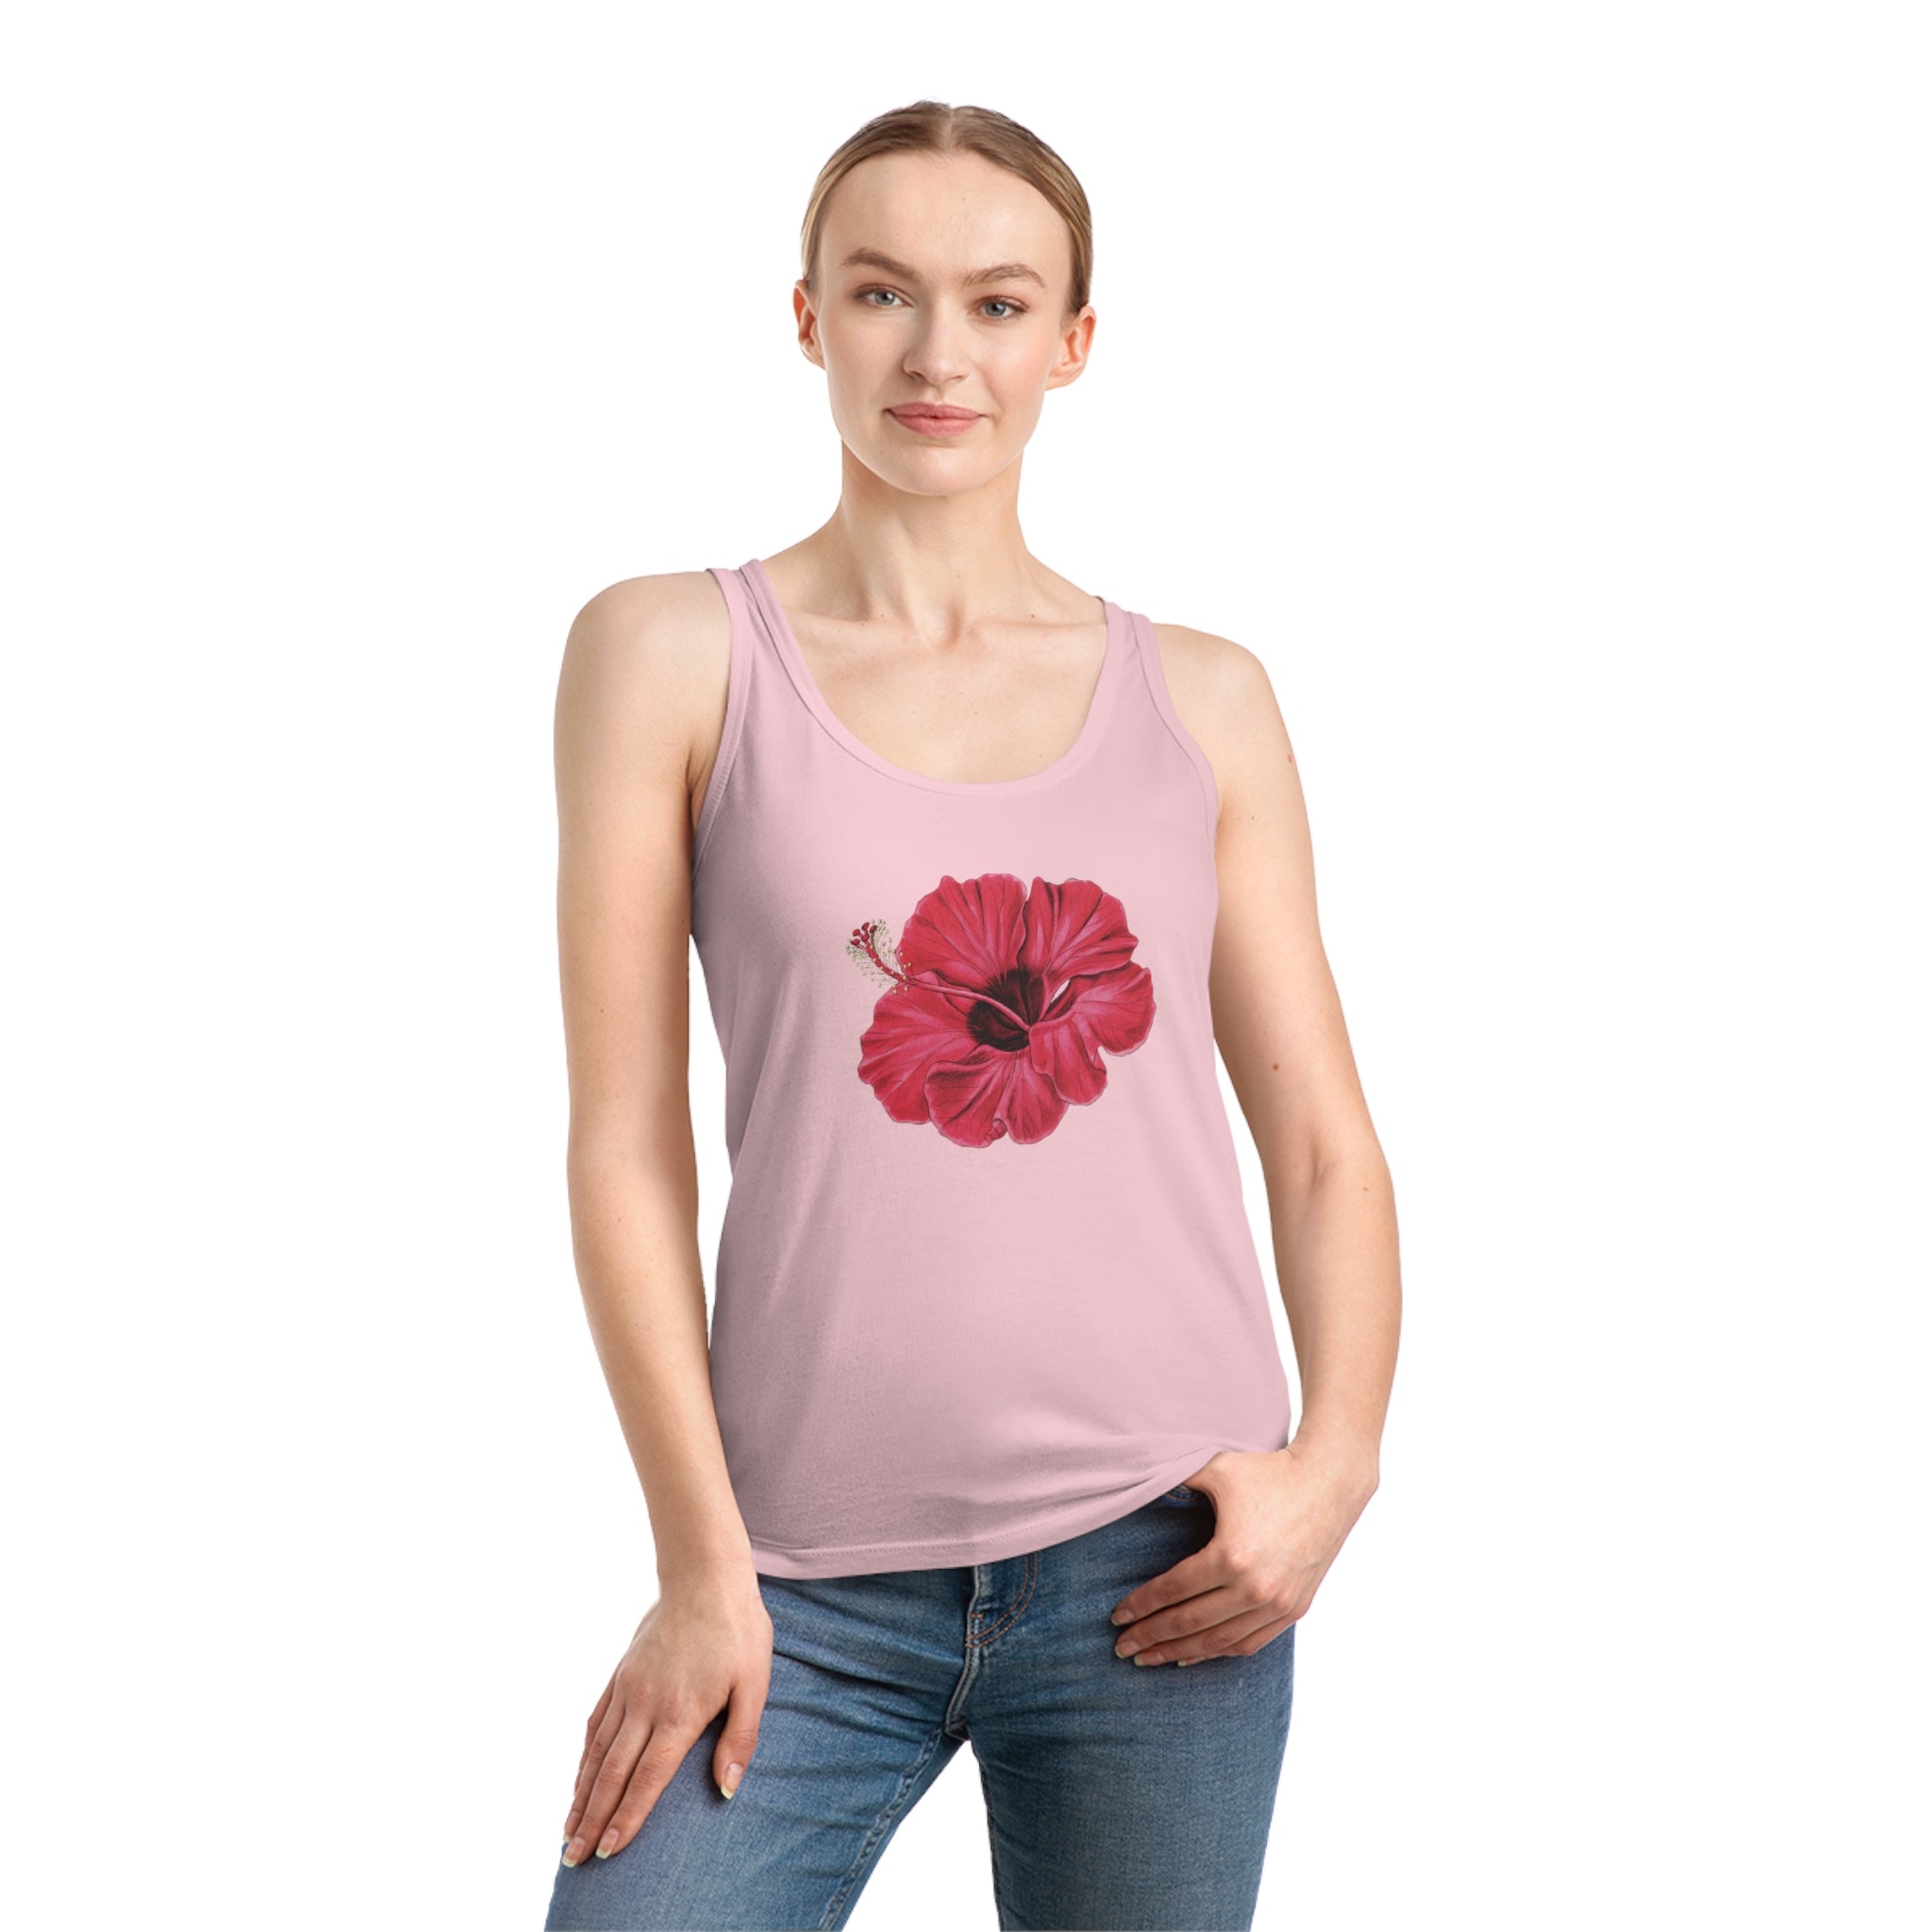 A women's Flower Red Tank Top with a red hibiscus flower on it.